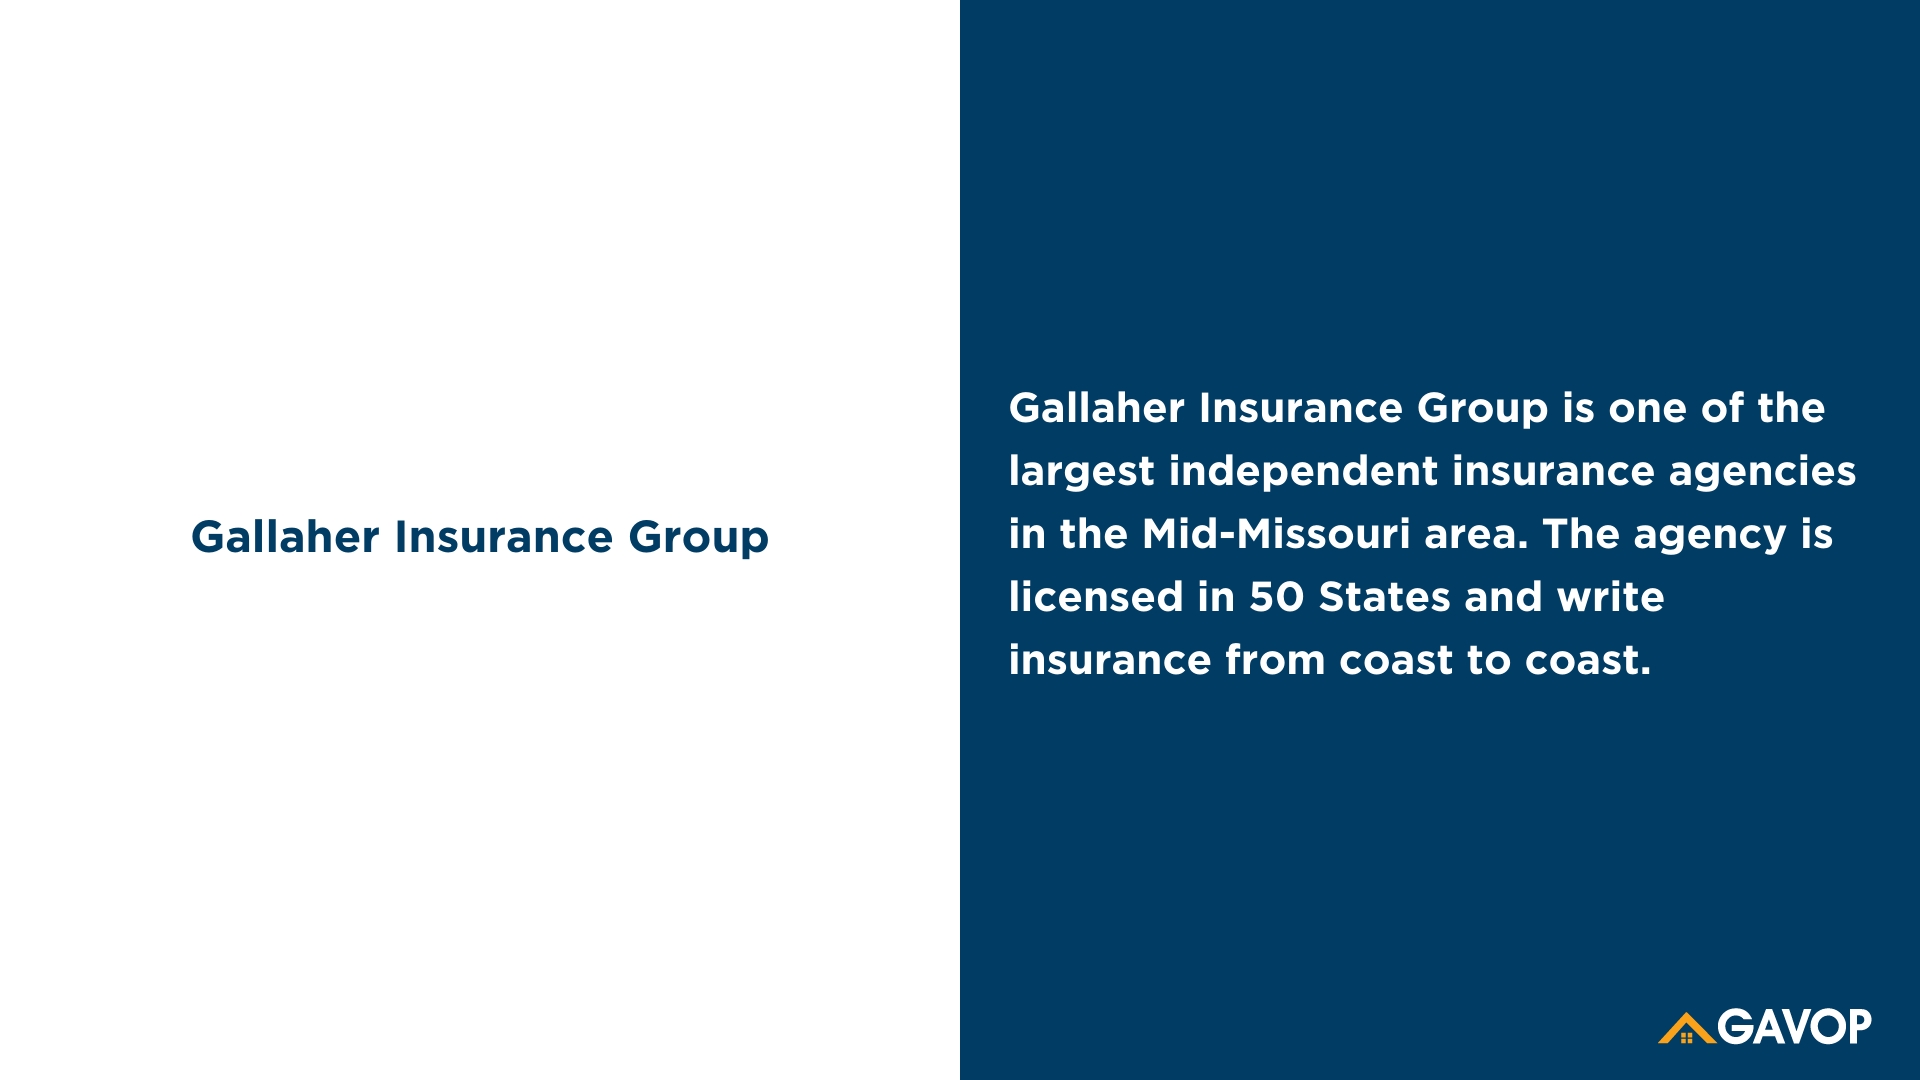 Gallaher Insurance Group